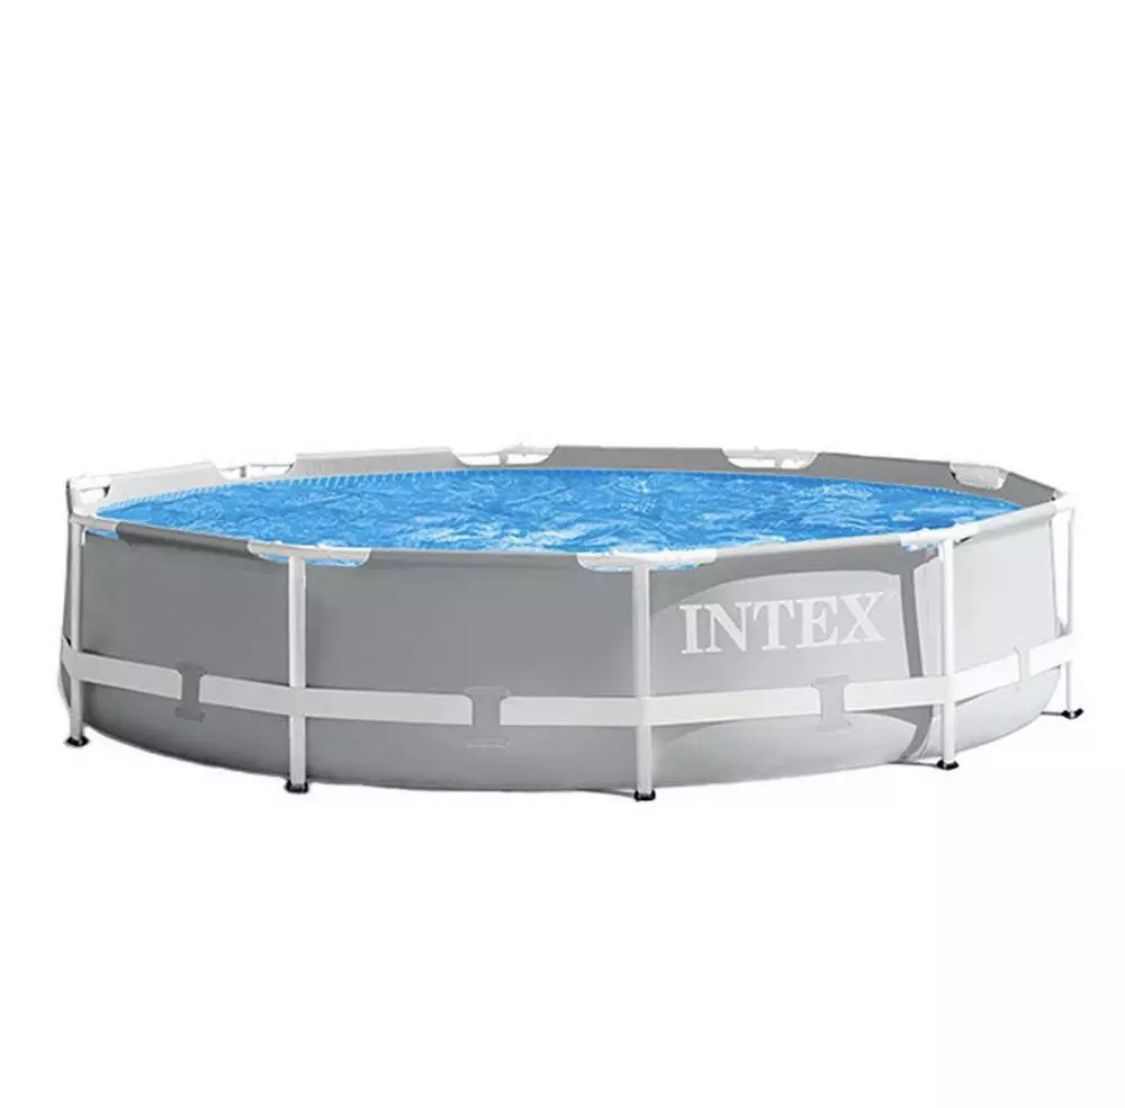 Intex 12ft x 30in Prism Metal Frame Above Ground Swimming Pool With Pump and filter